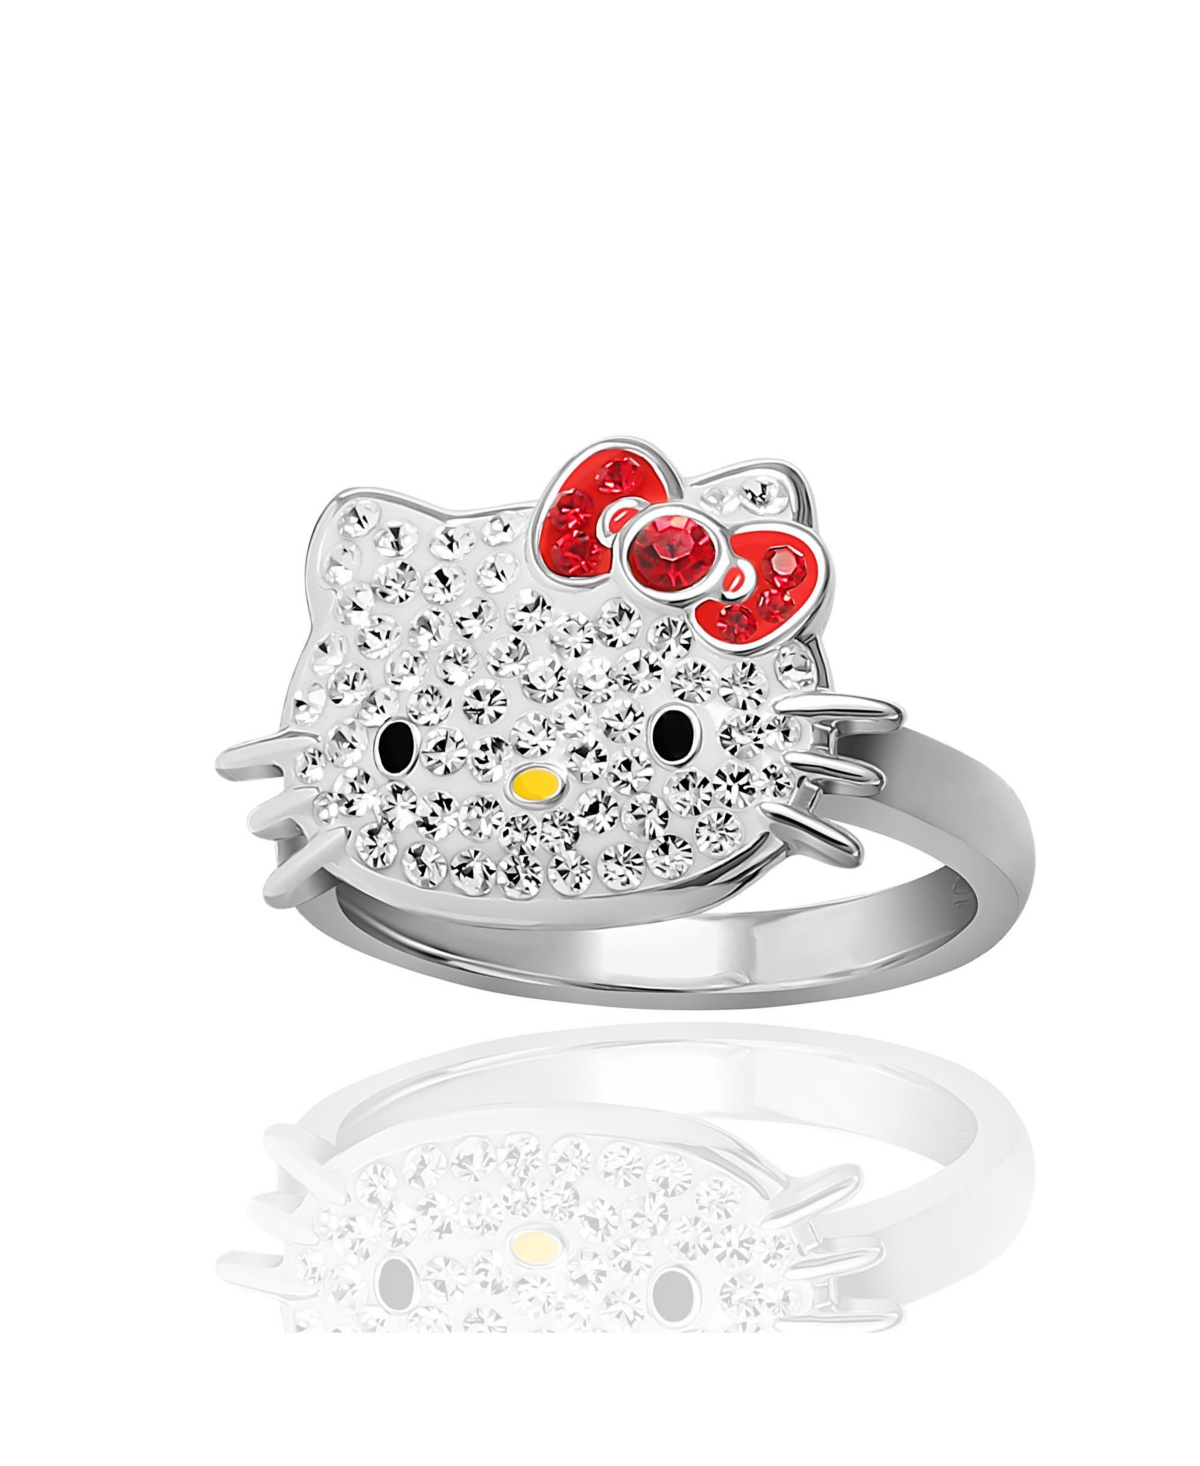 Sanrio Hello Kitty Silver Plated Crystal Accessories Jewelry Ring - Size 5 - Silver tone, red, yellow